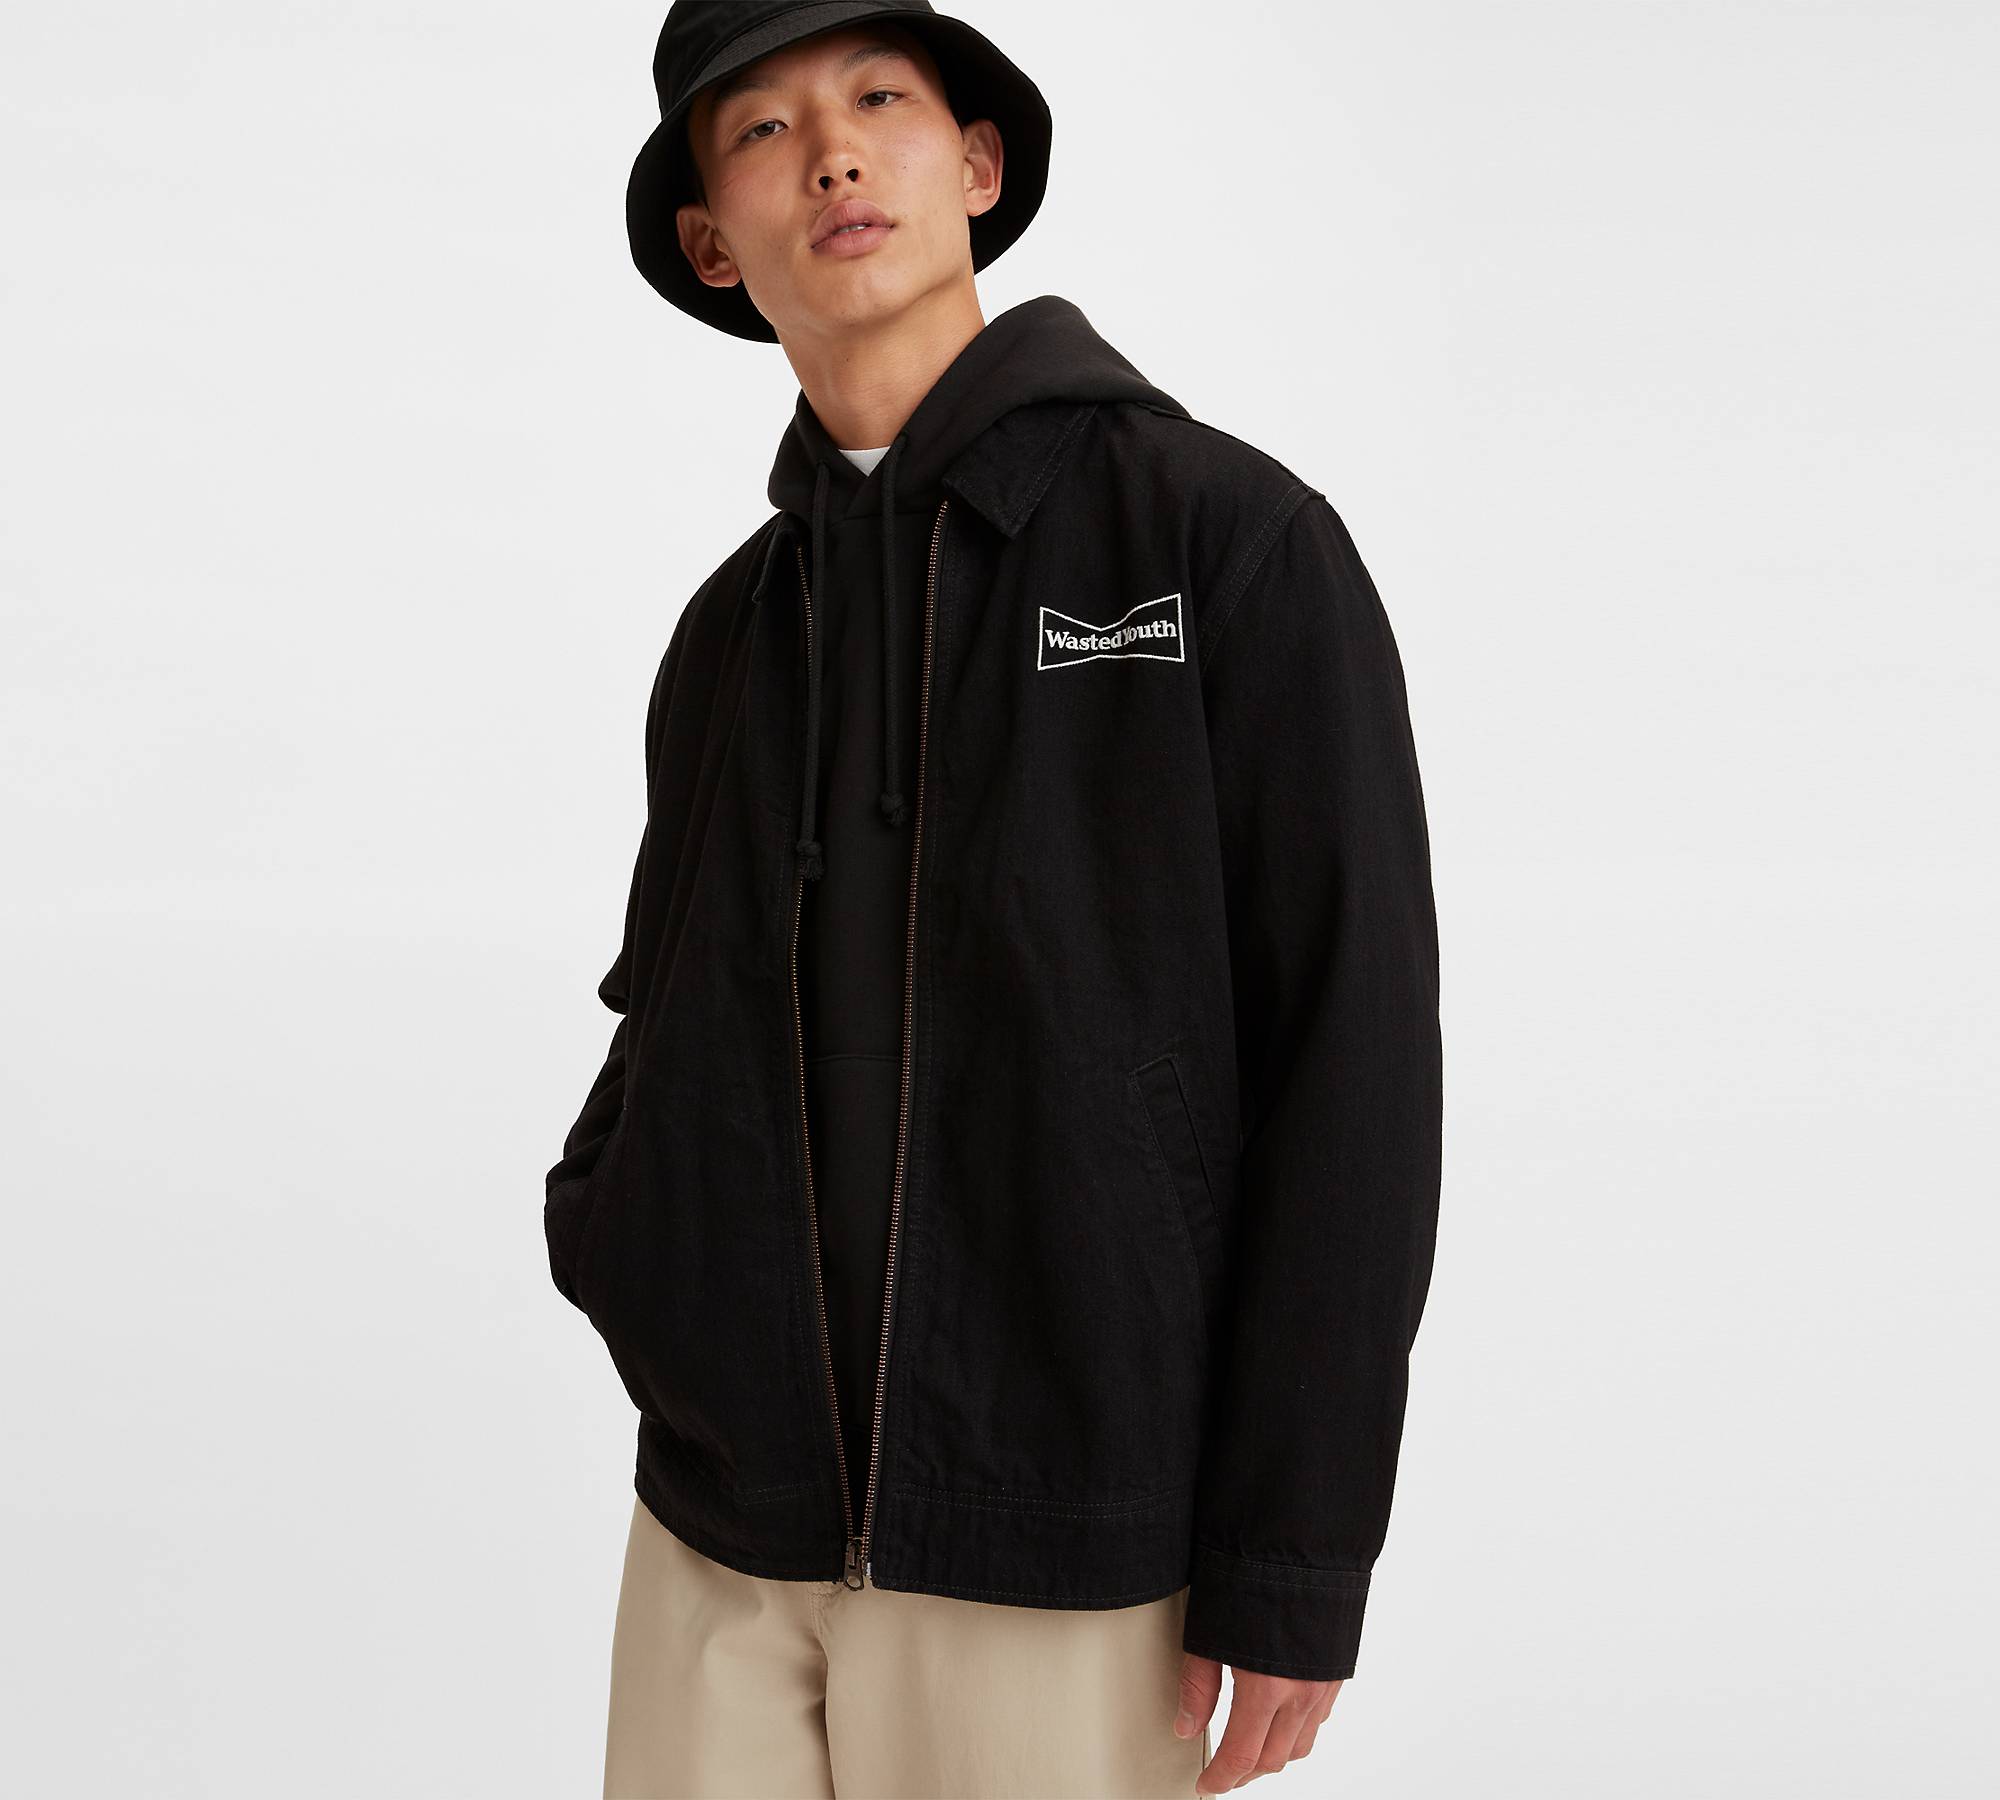 Levi's VERDY Wasted Youth WORKERS JACKET